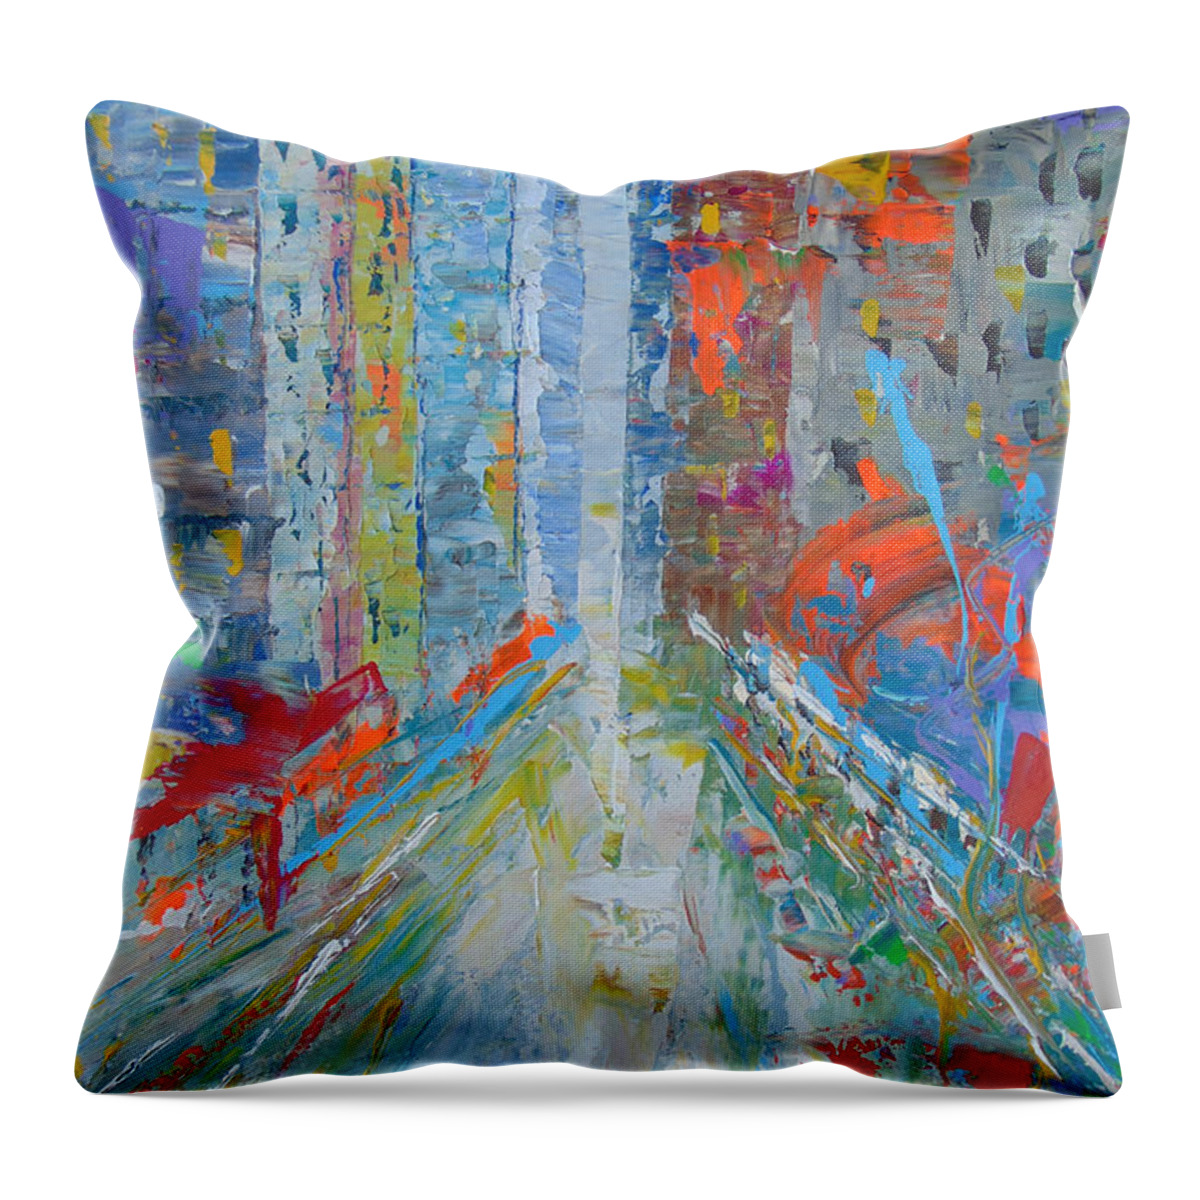 Impressionist Throw Pillow featuring the painting New York by Frederic Payet